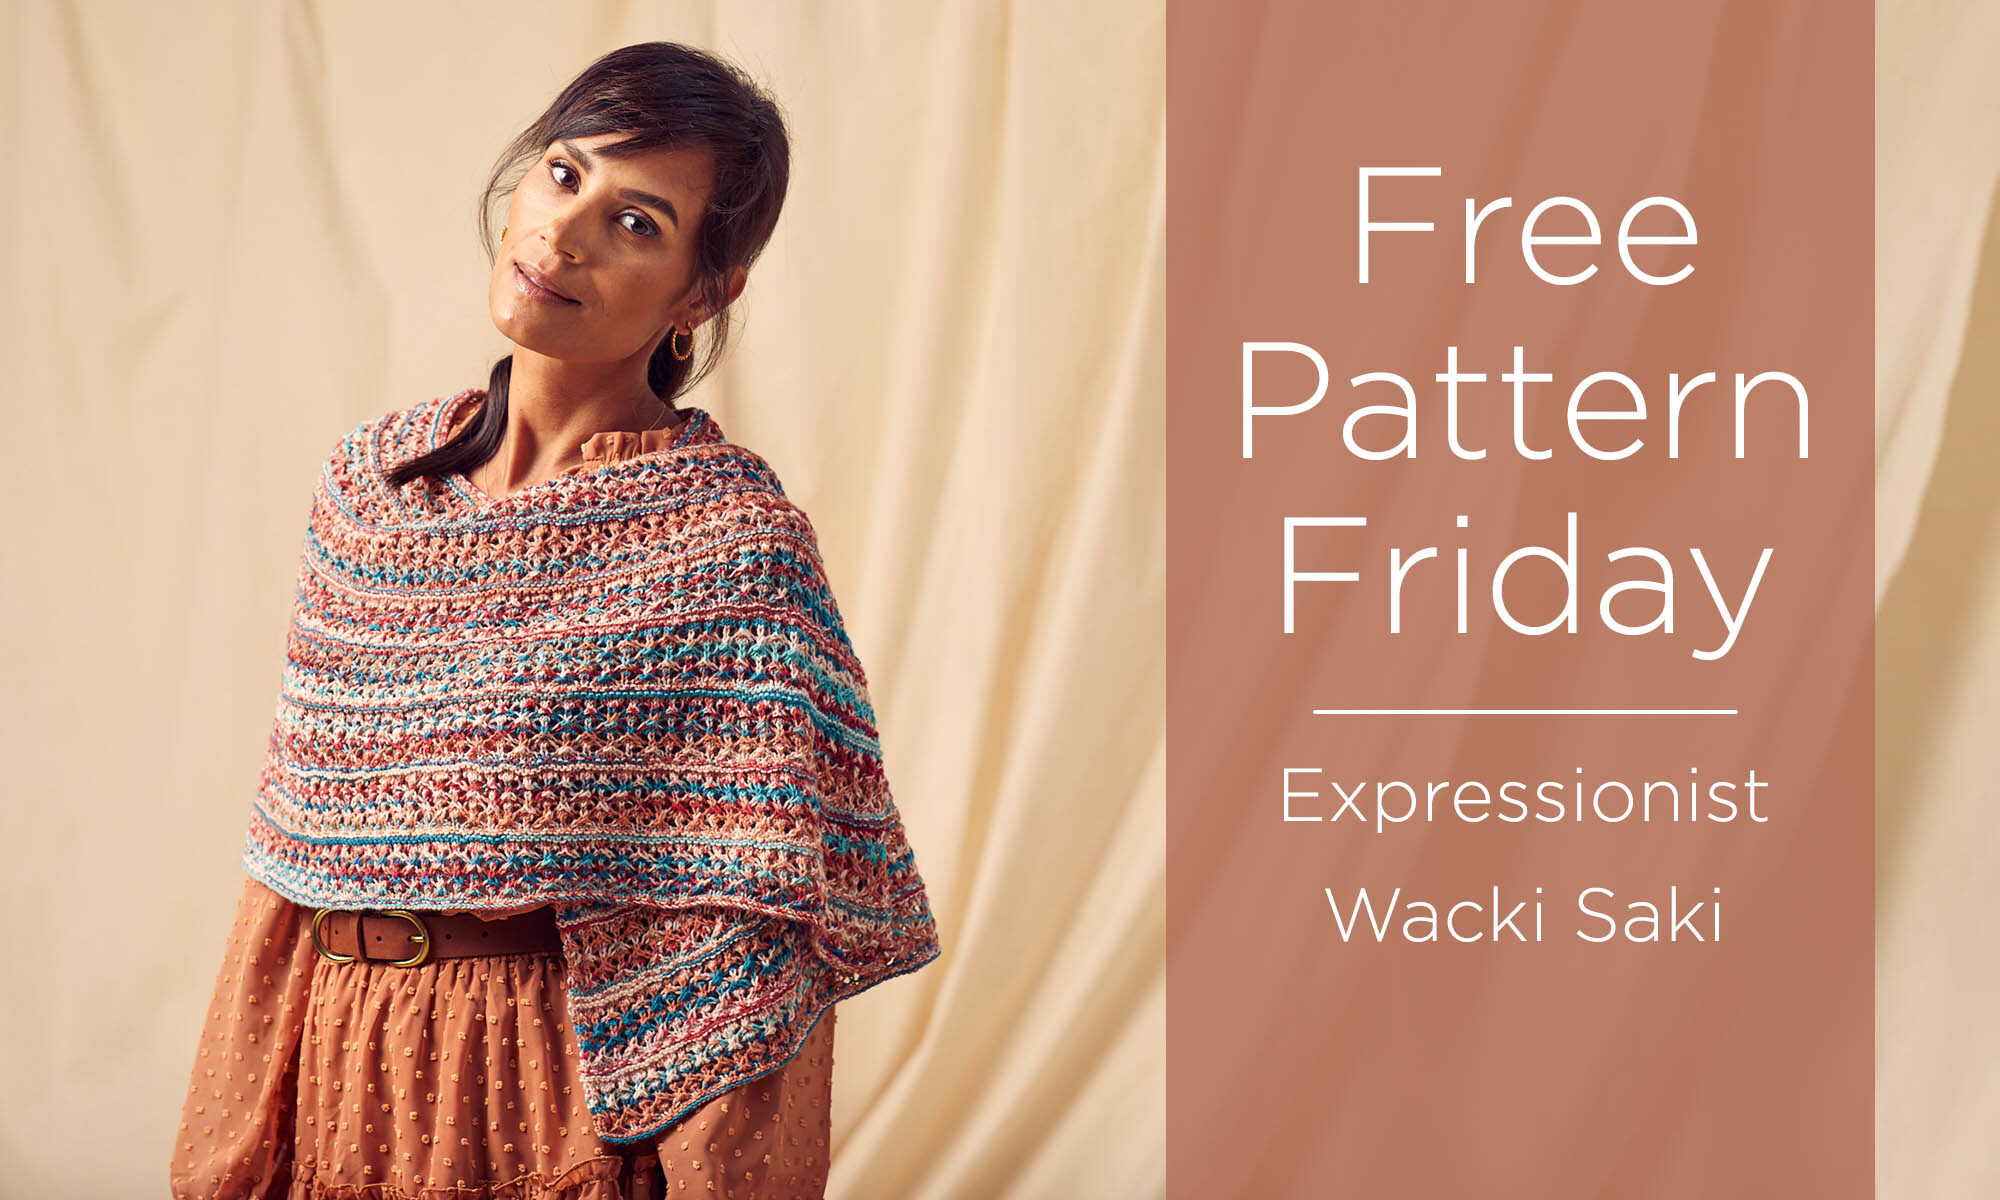 Image of woman in knitted shawl. Text reads, Free Pattern Friday, Expressionist in Wacki Saki